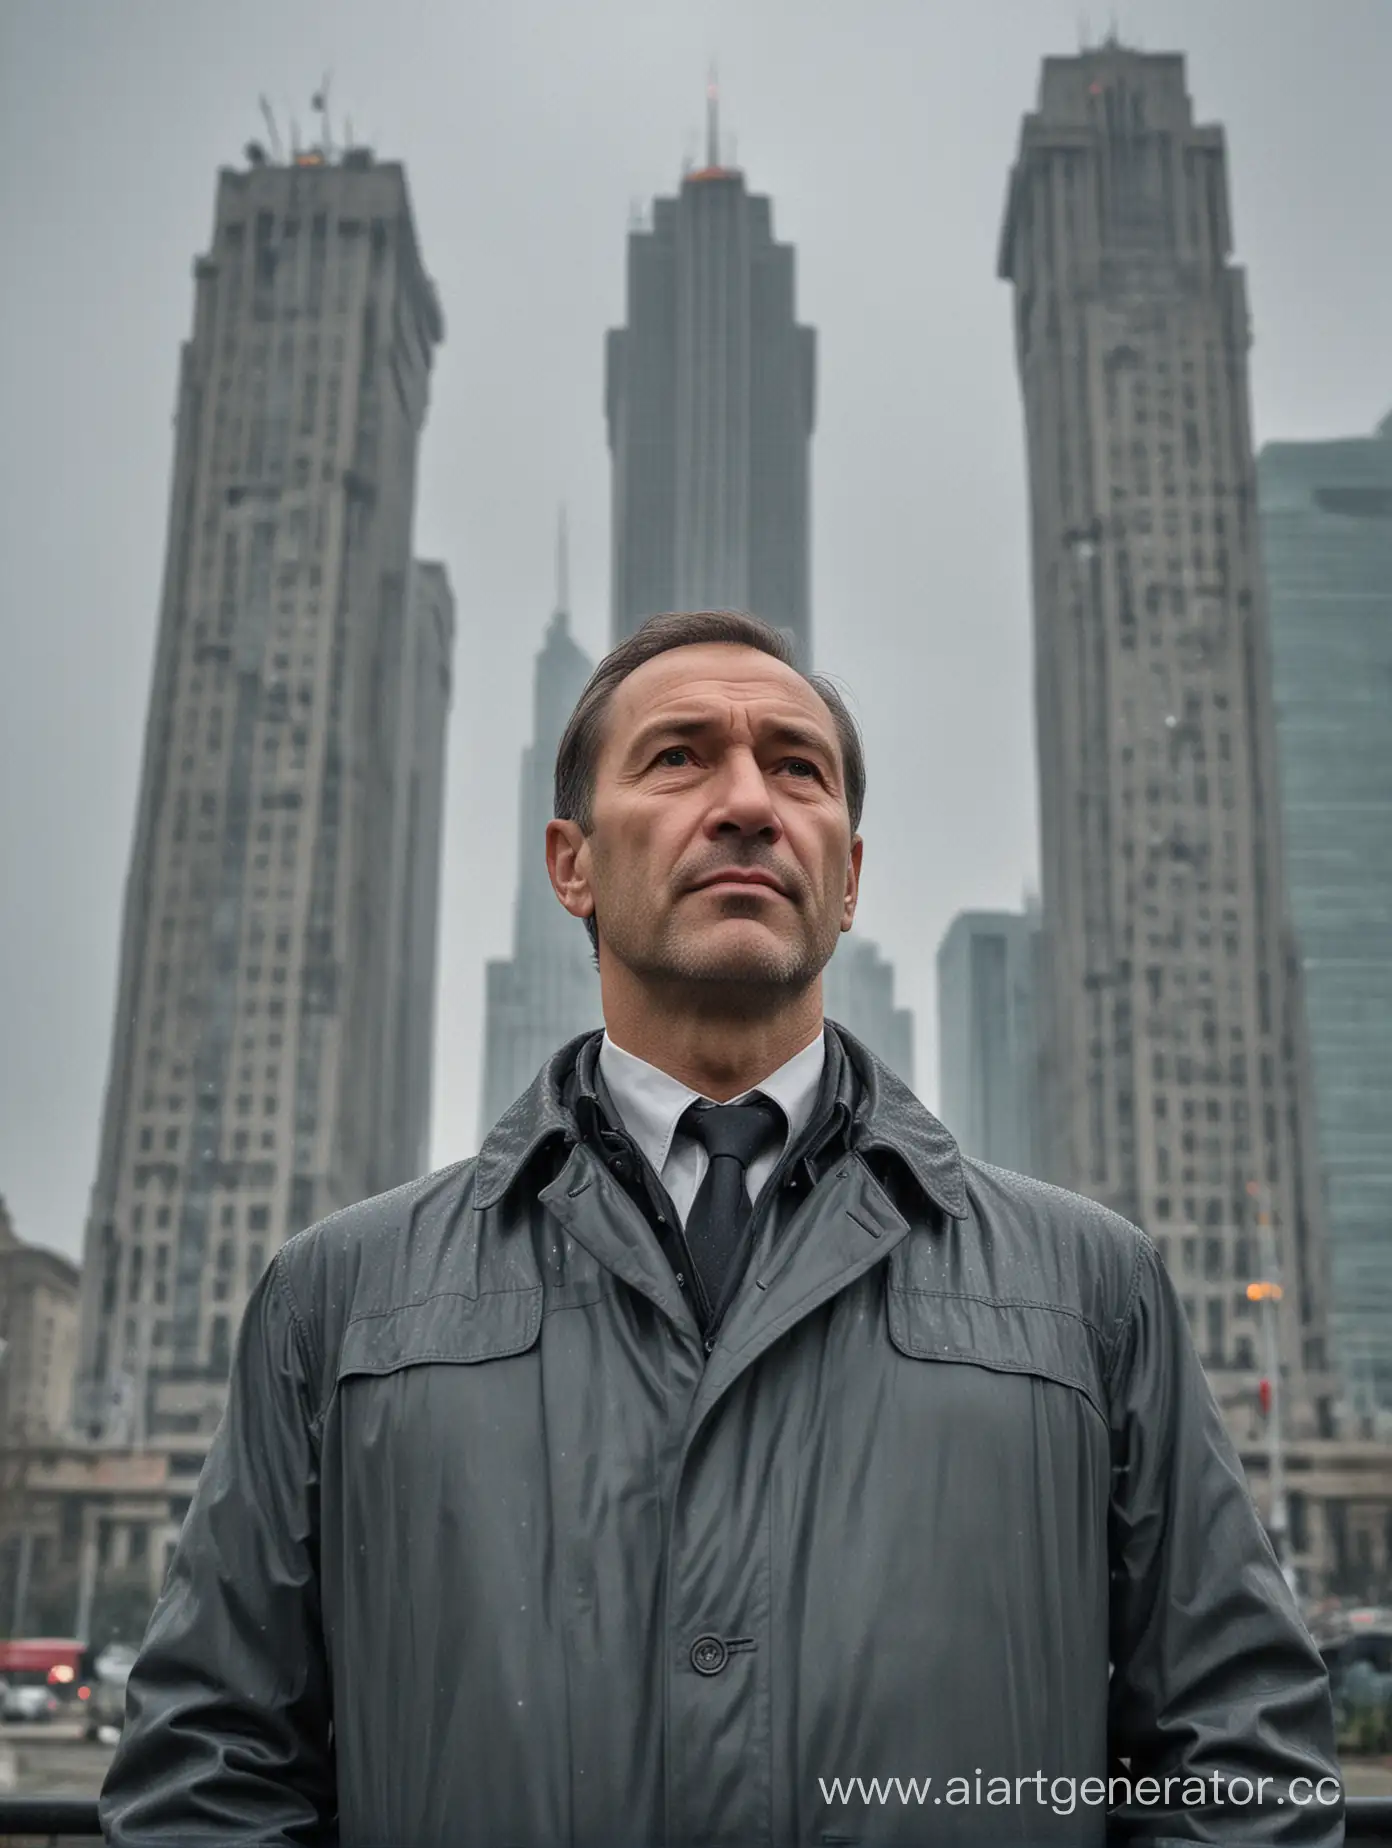 Middleaged-Man-in-Front-of-Stalinist-Skyscraper-on-Rainy-Day